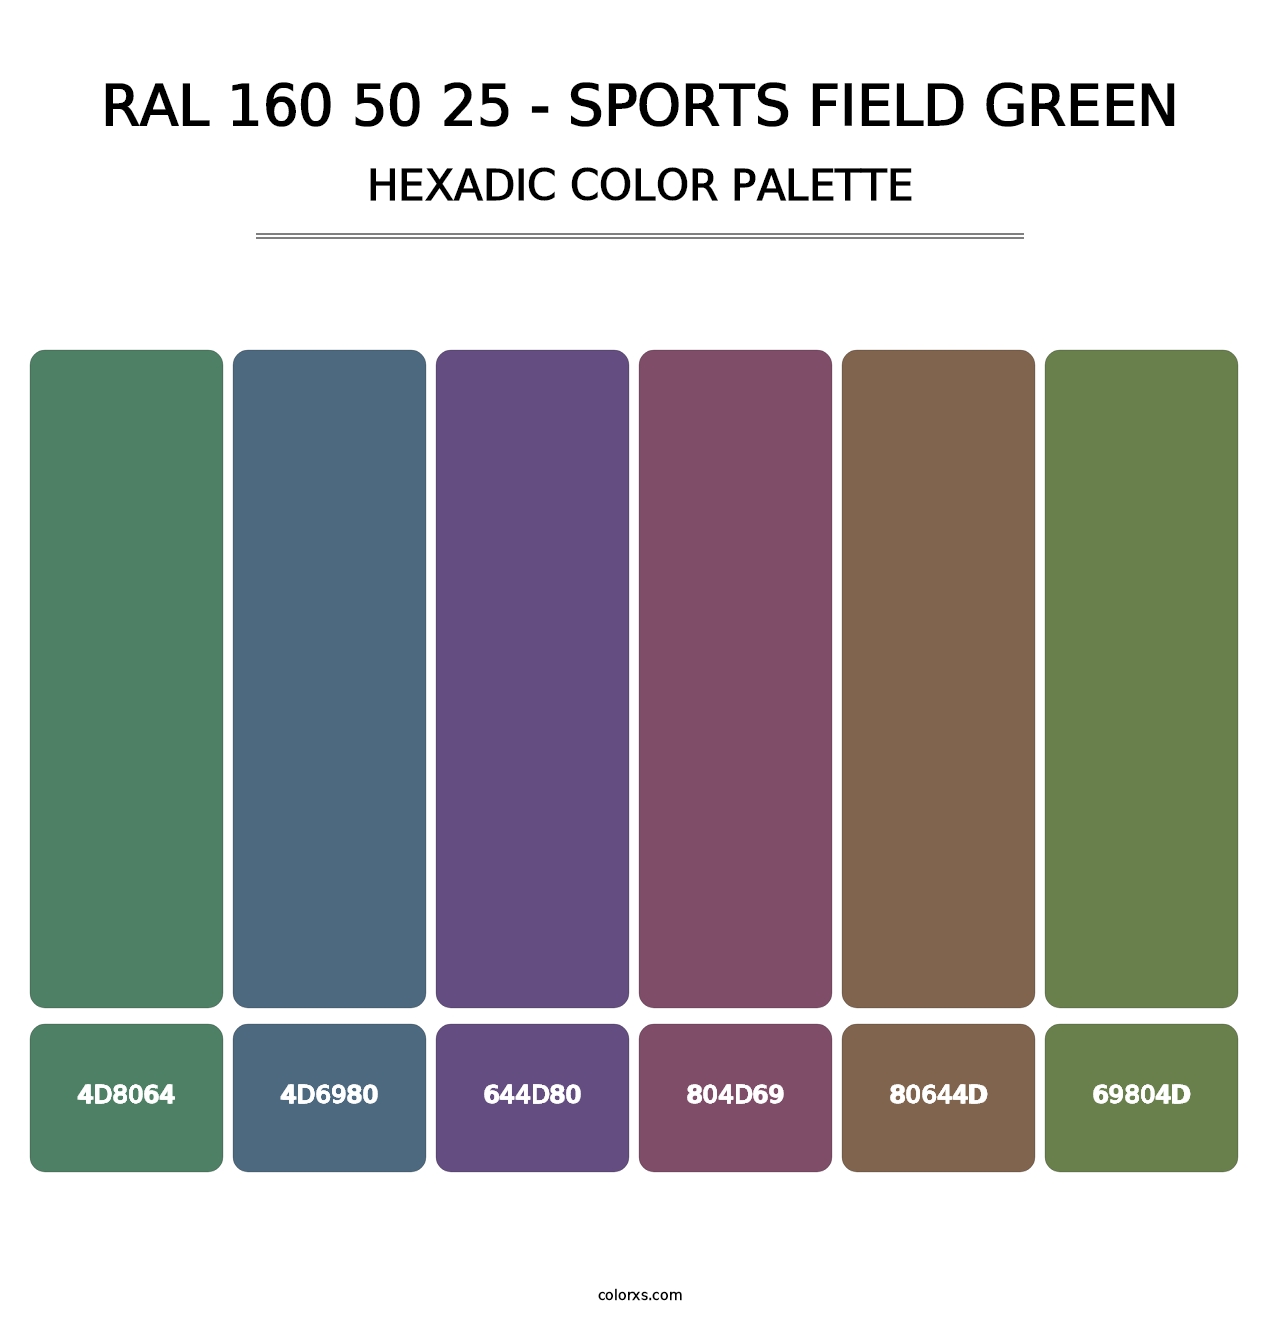 RAL 160 50 25 - Sports Field Green - Hexadic Color Palette